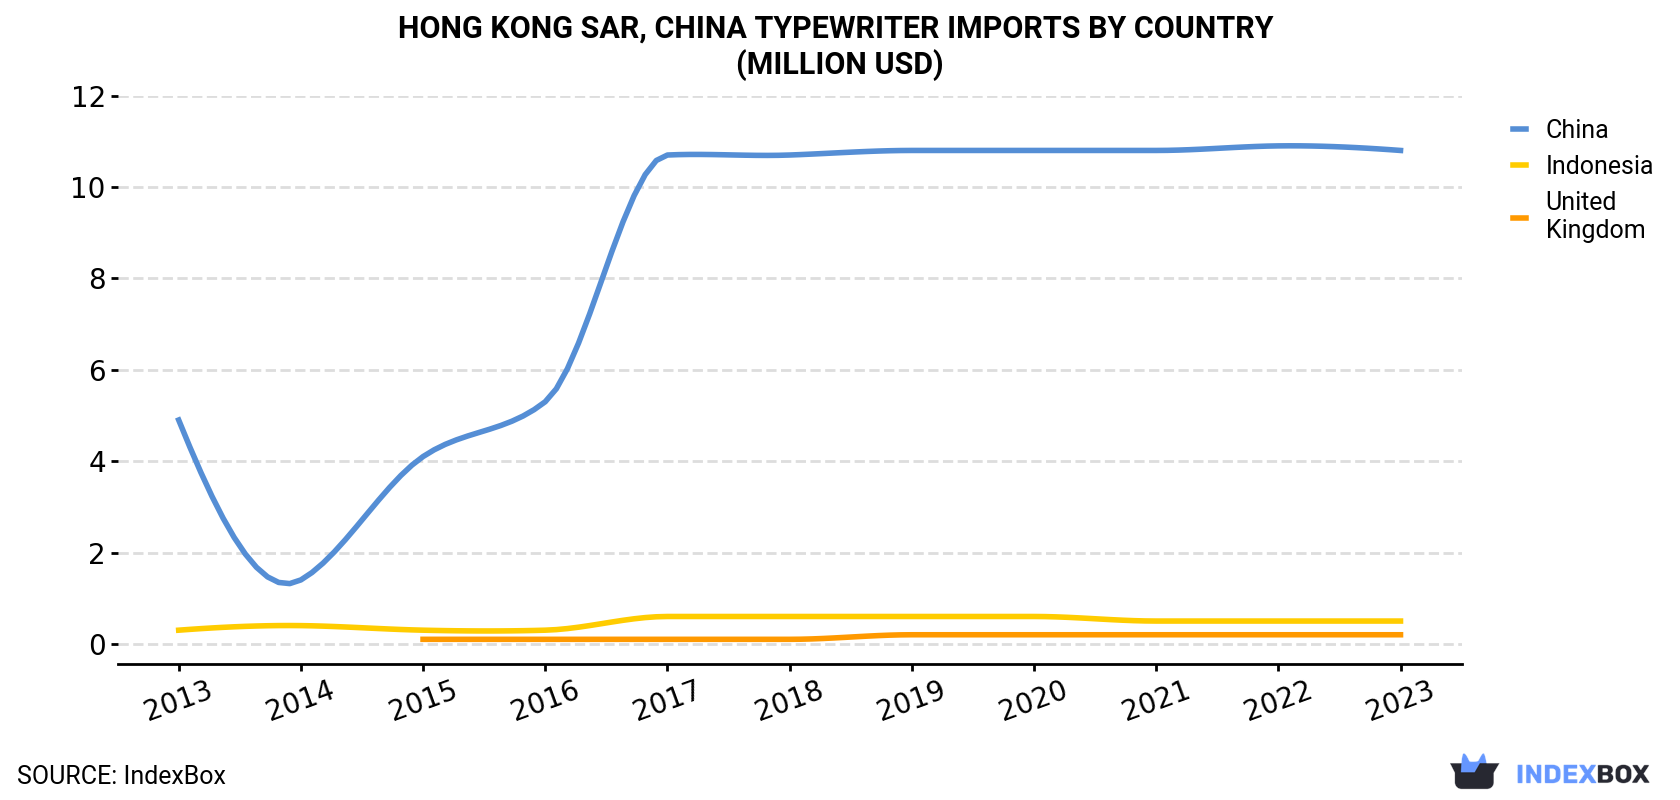 Hong Kong Typewriter Imports By Country (Million USD)